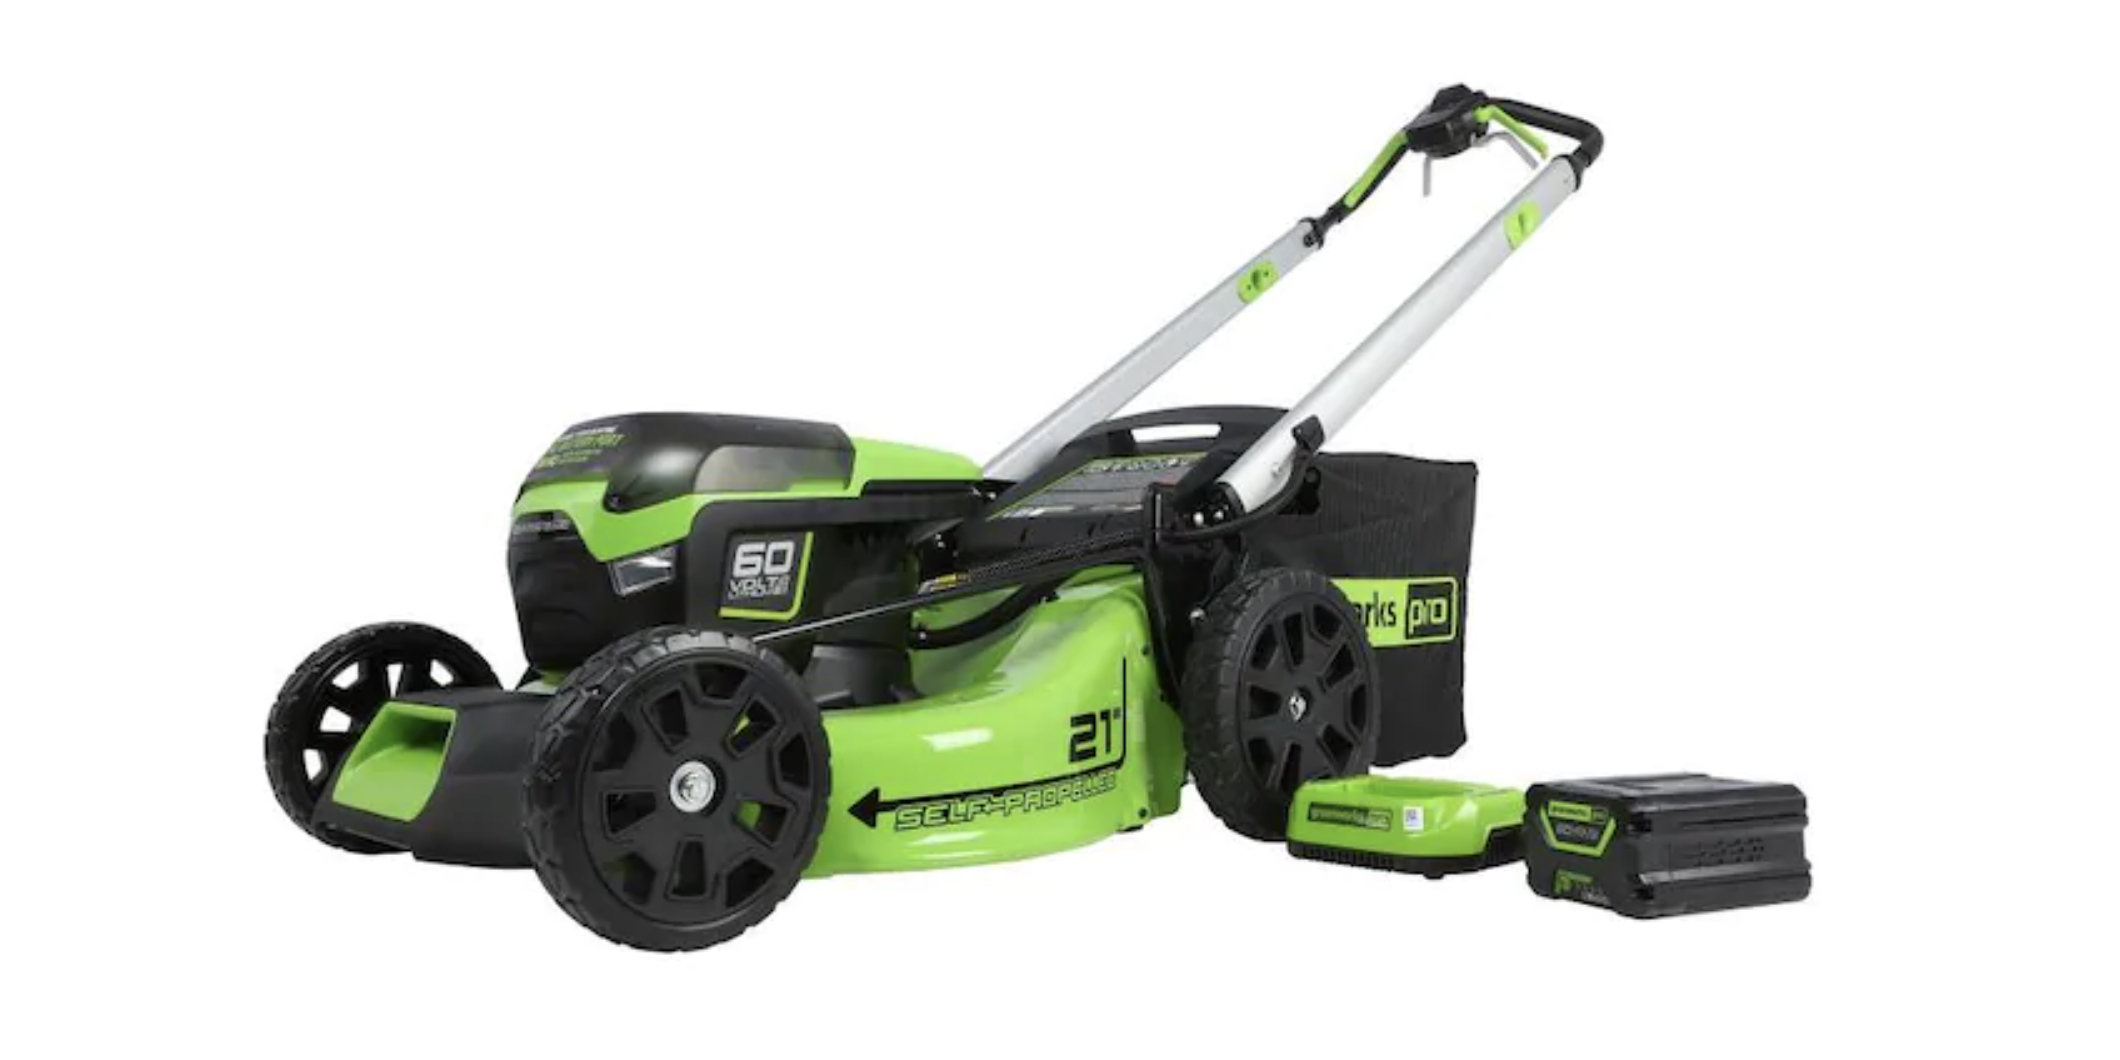 Green Deals Greenworks Pro 60V 21inch Electric Lawn Mower 257, more